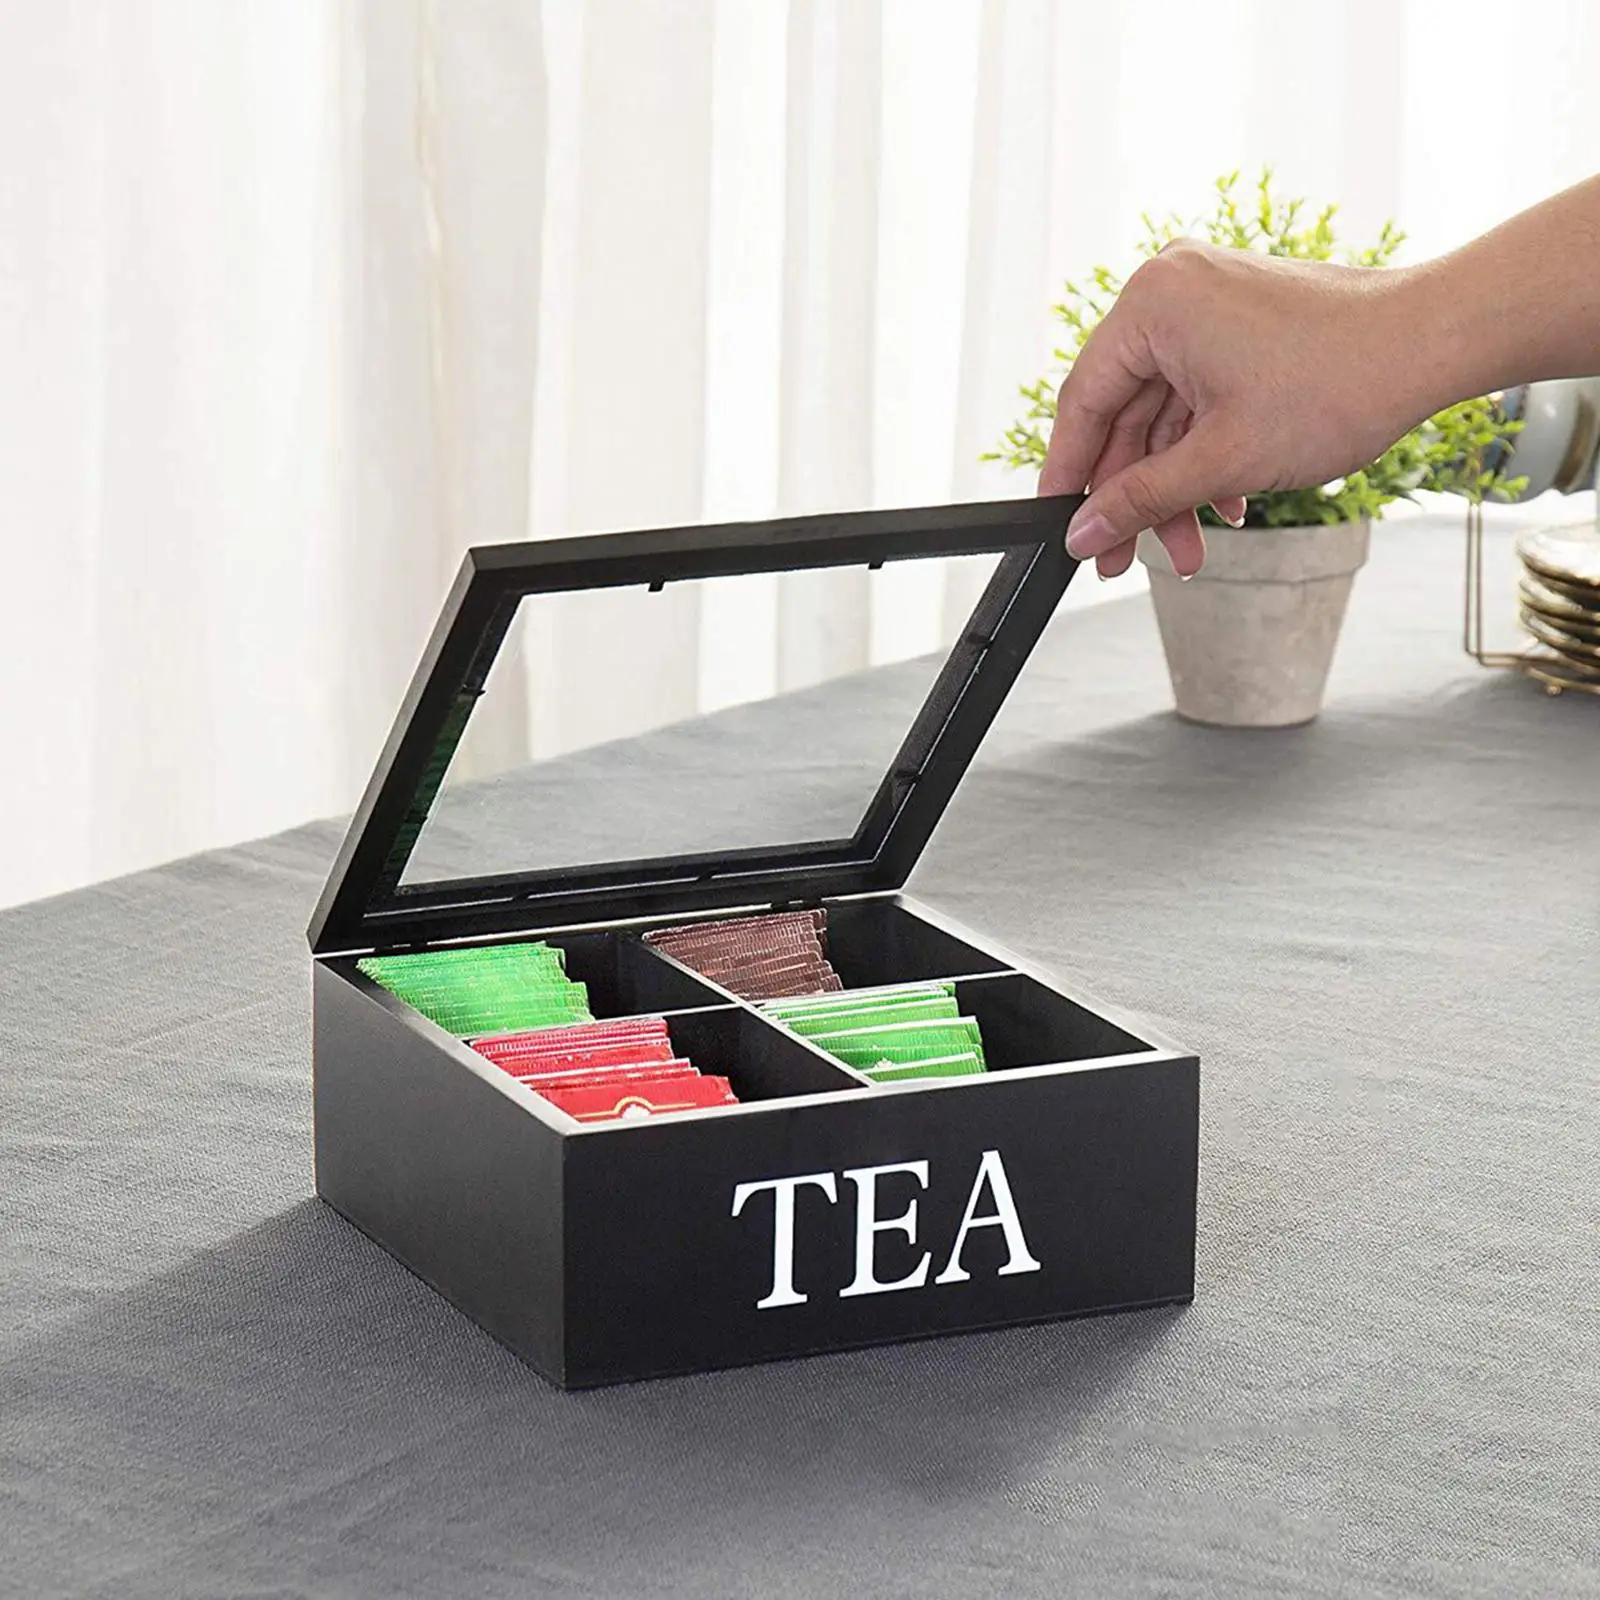 Wooden Tea Box with Lid Clear Skylights Tea Bag Storage for Dried Flowers Tea Bags Creamers